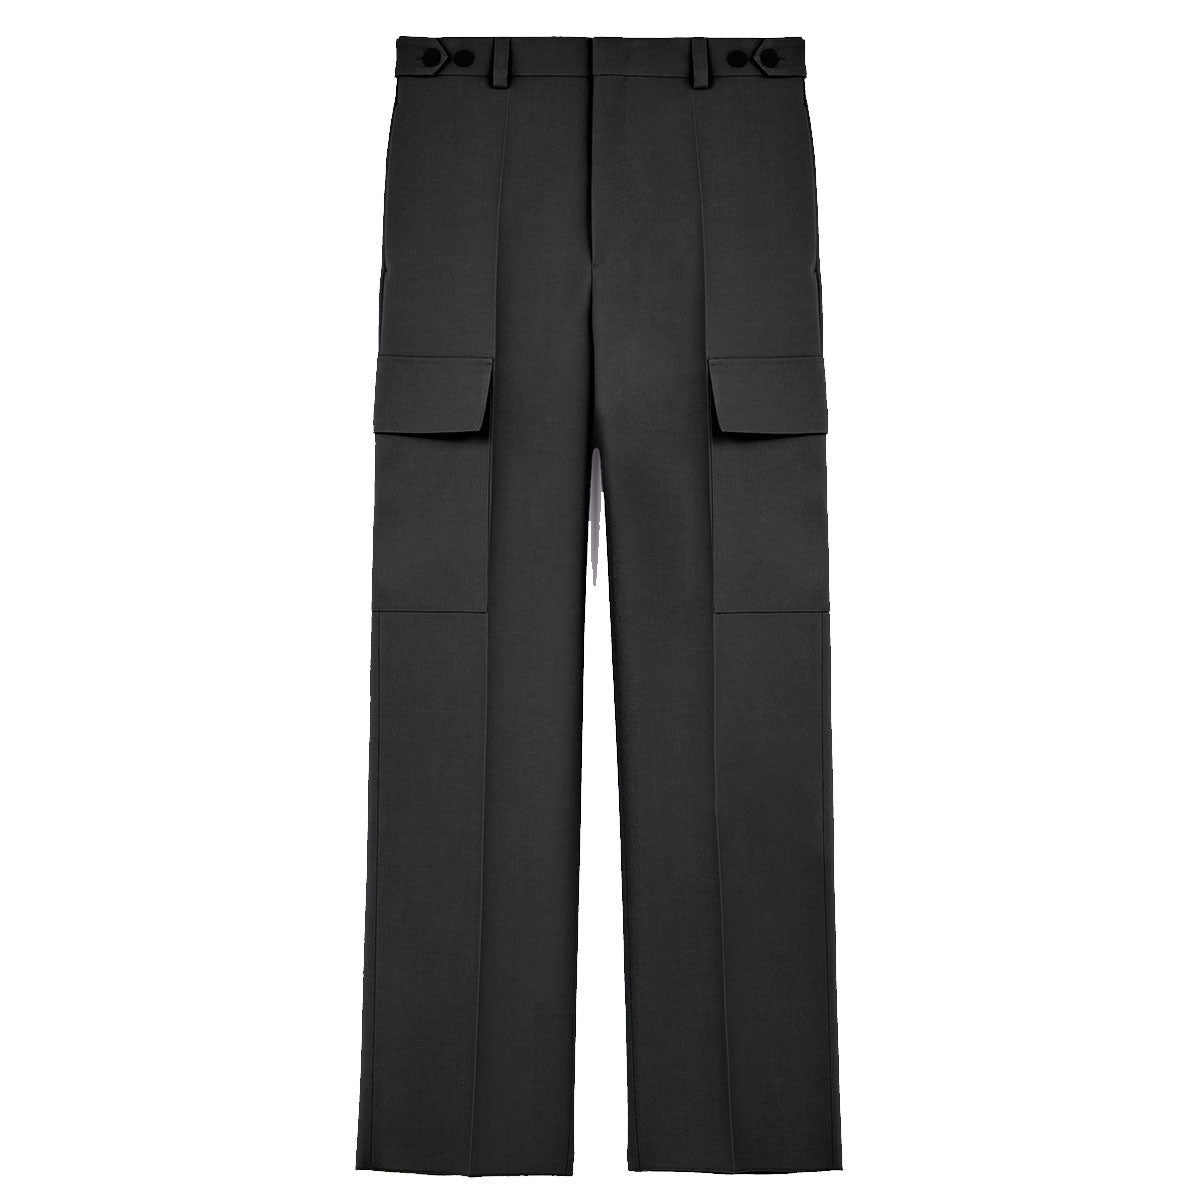 TROUSER E 04 AW 25 - Why are you here?